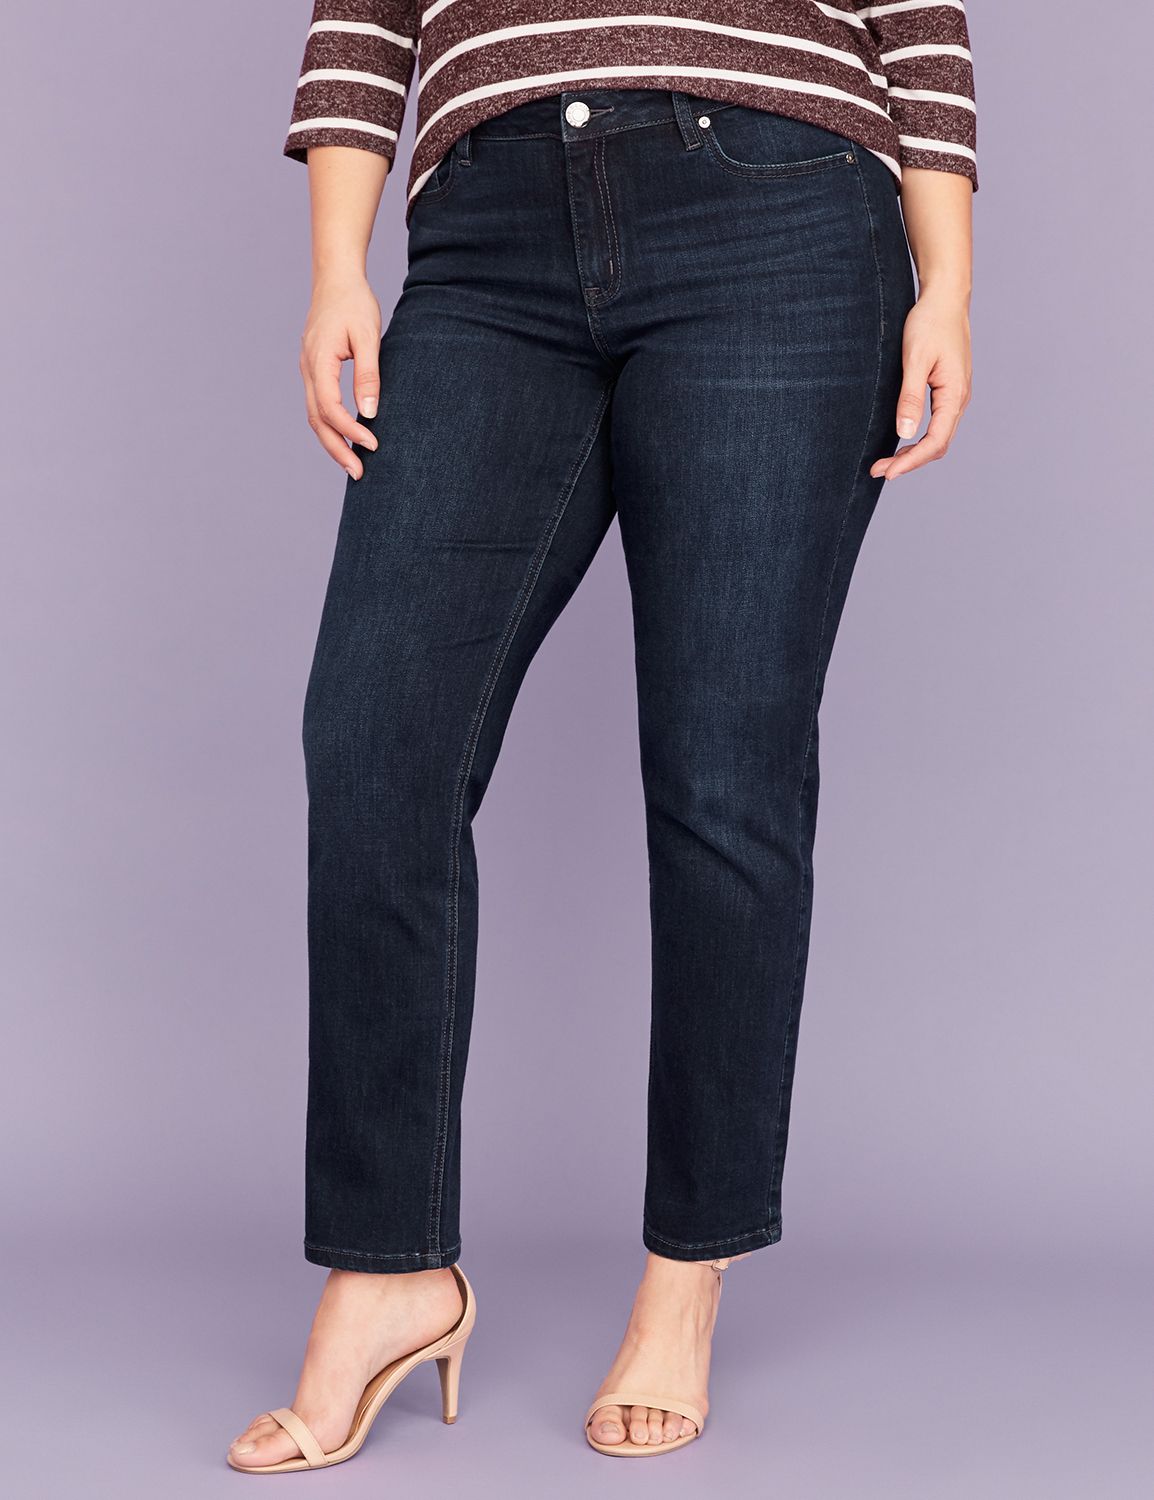 Plus Size Jeans Skinny Bootcut And More Lane Bryant